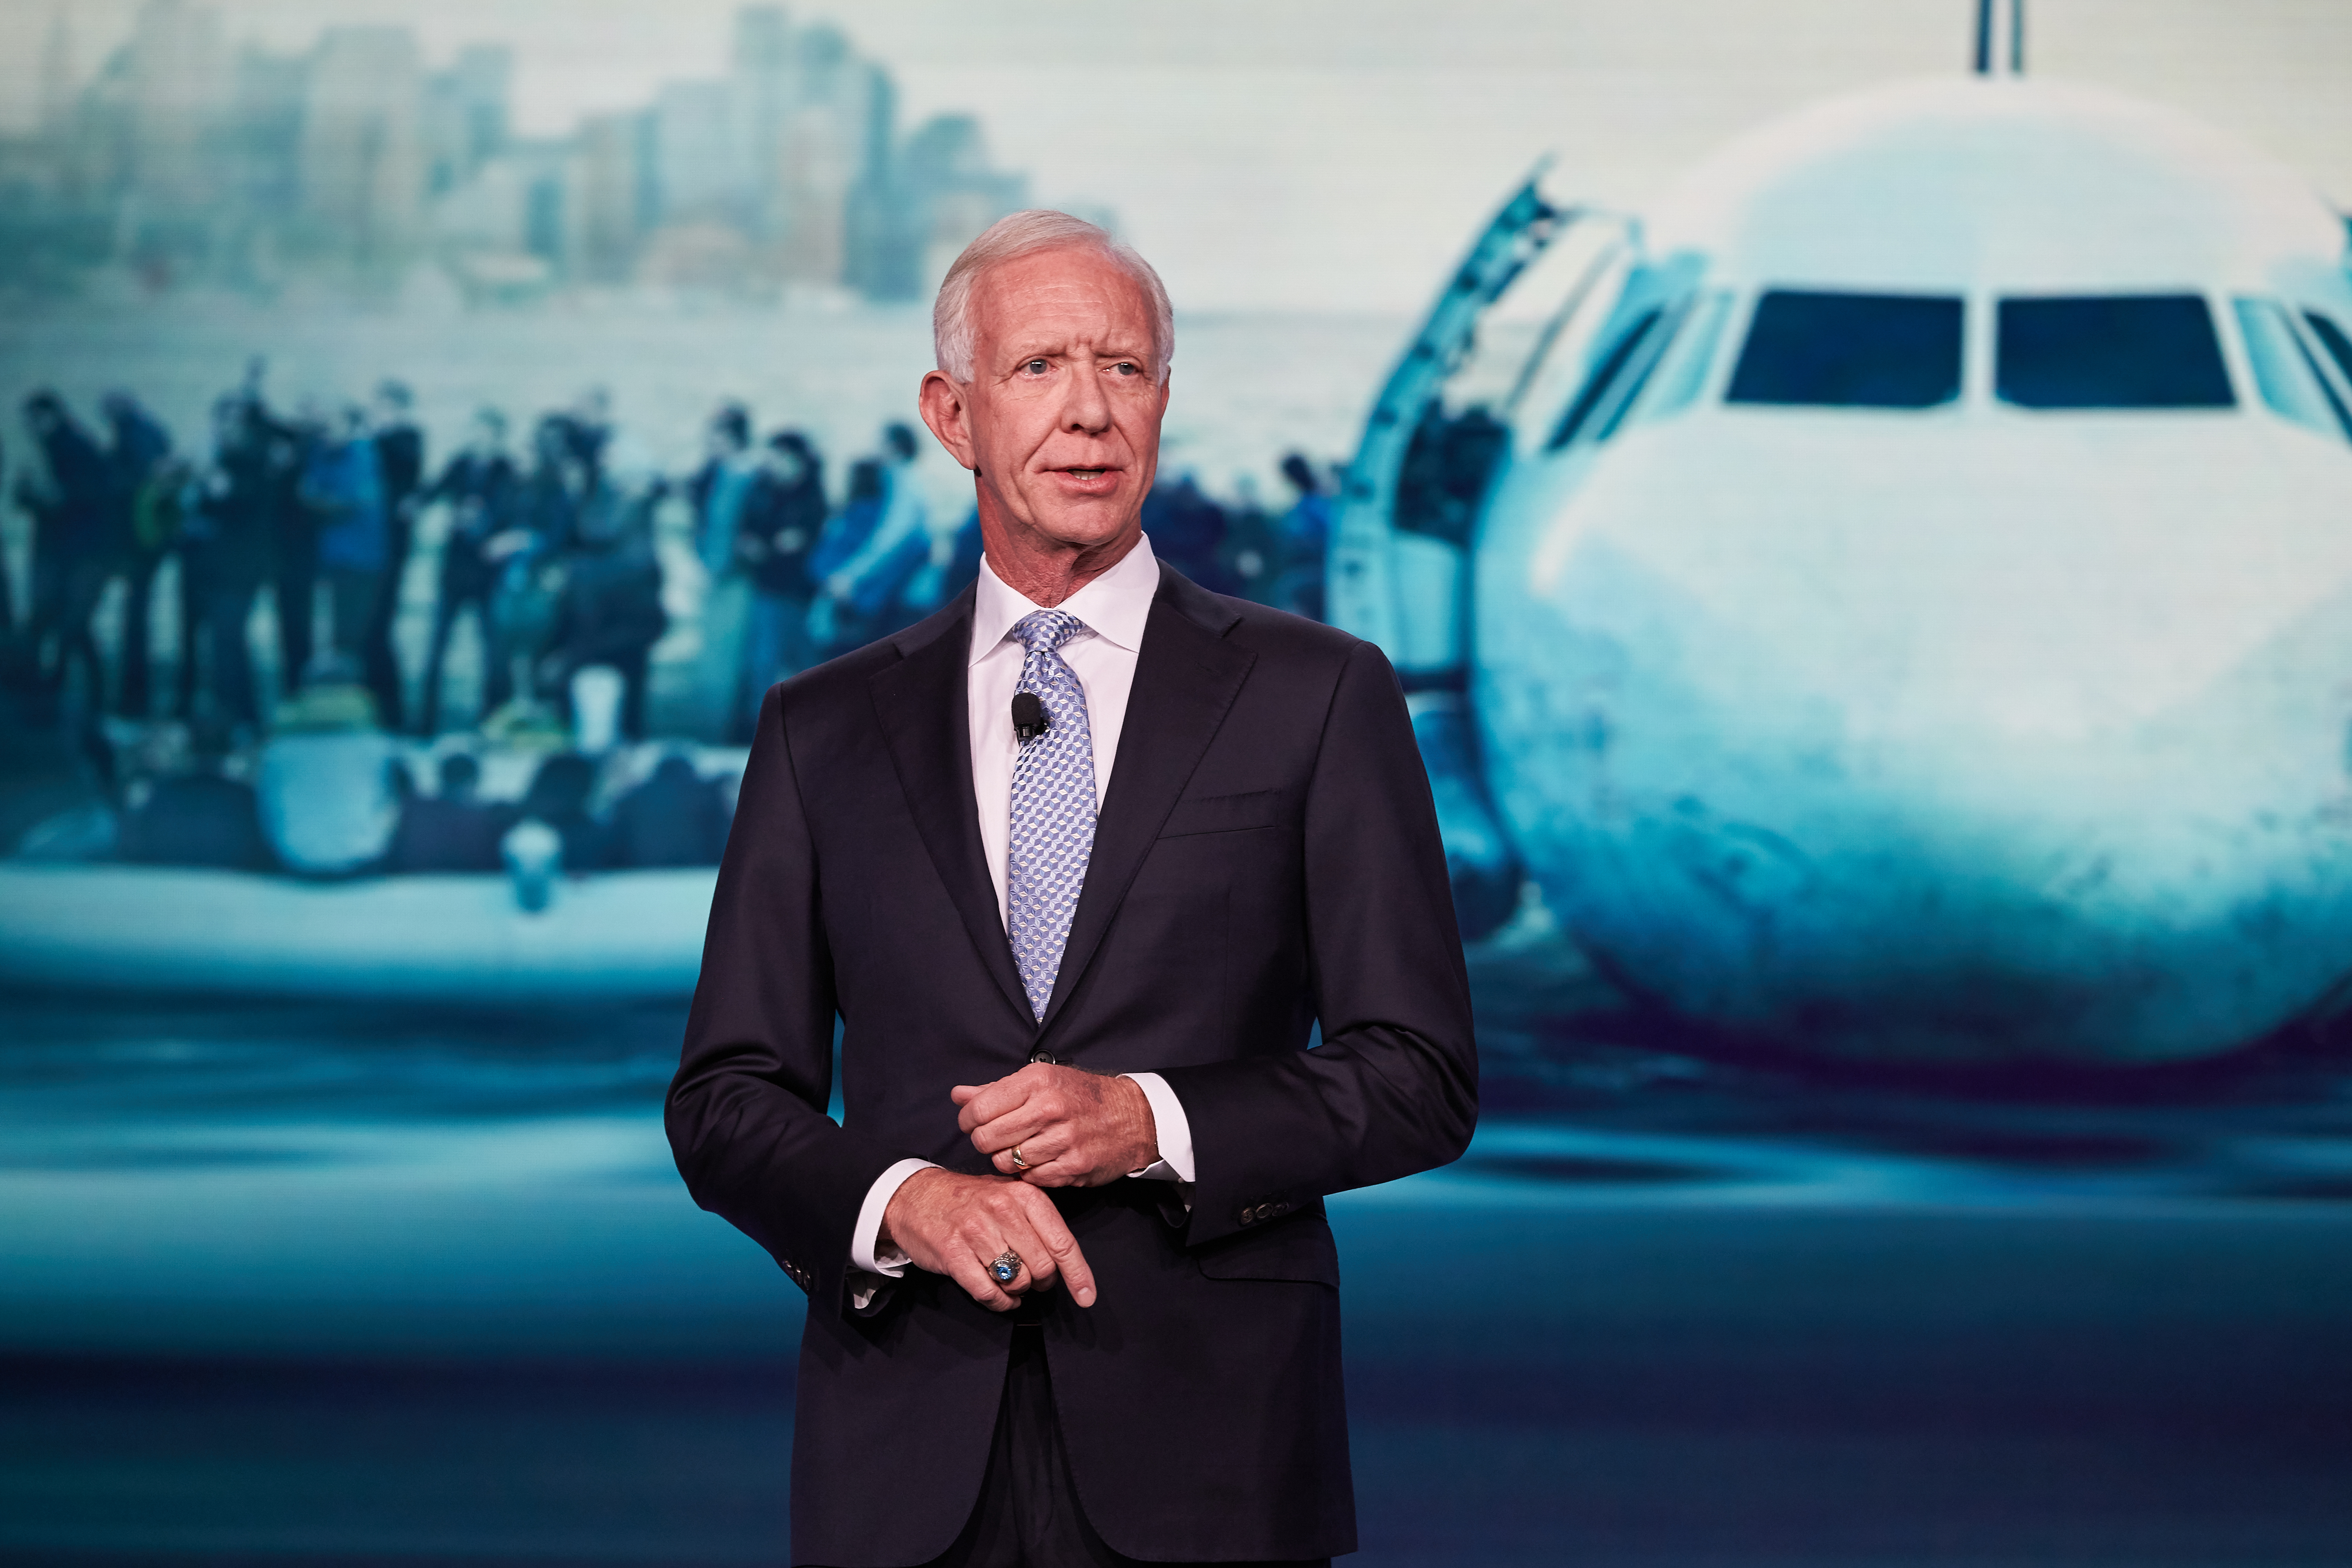 <p><strong><span>Ambassador</span> Sullenberger’s game-changing lessons featured in <em>Forbes </em></strong></p>